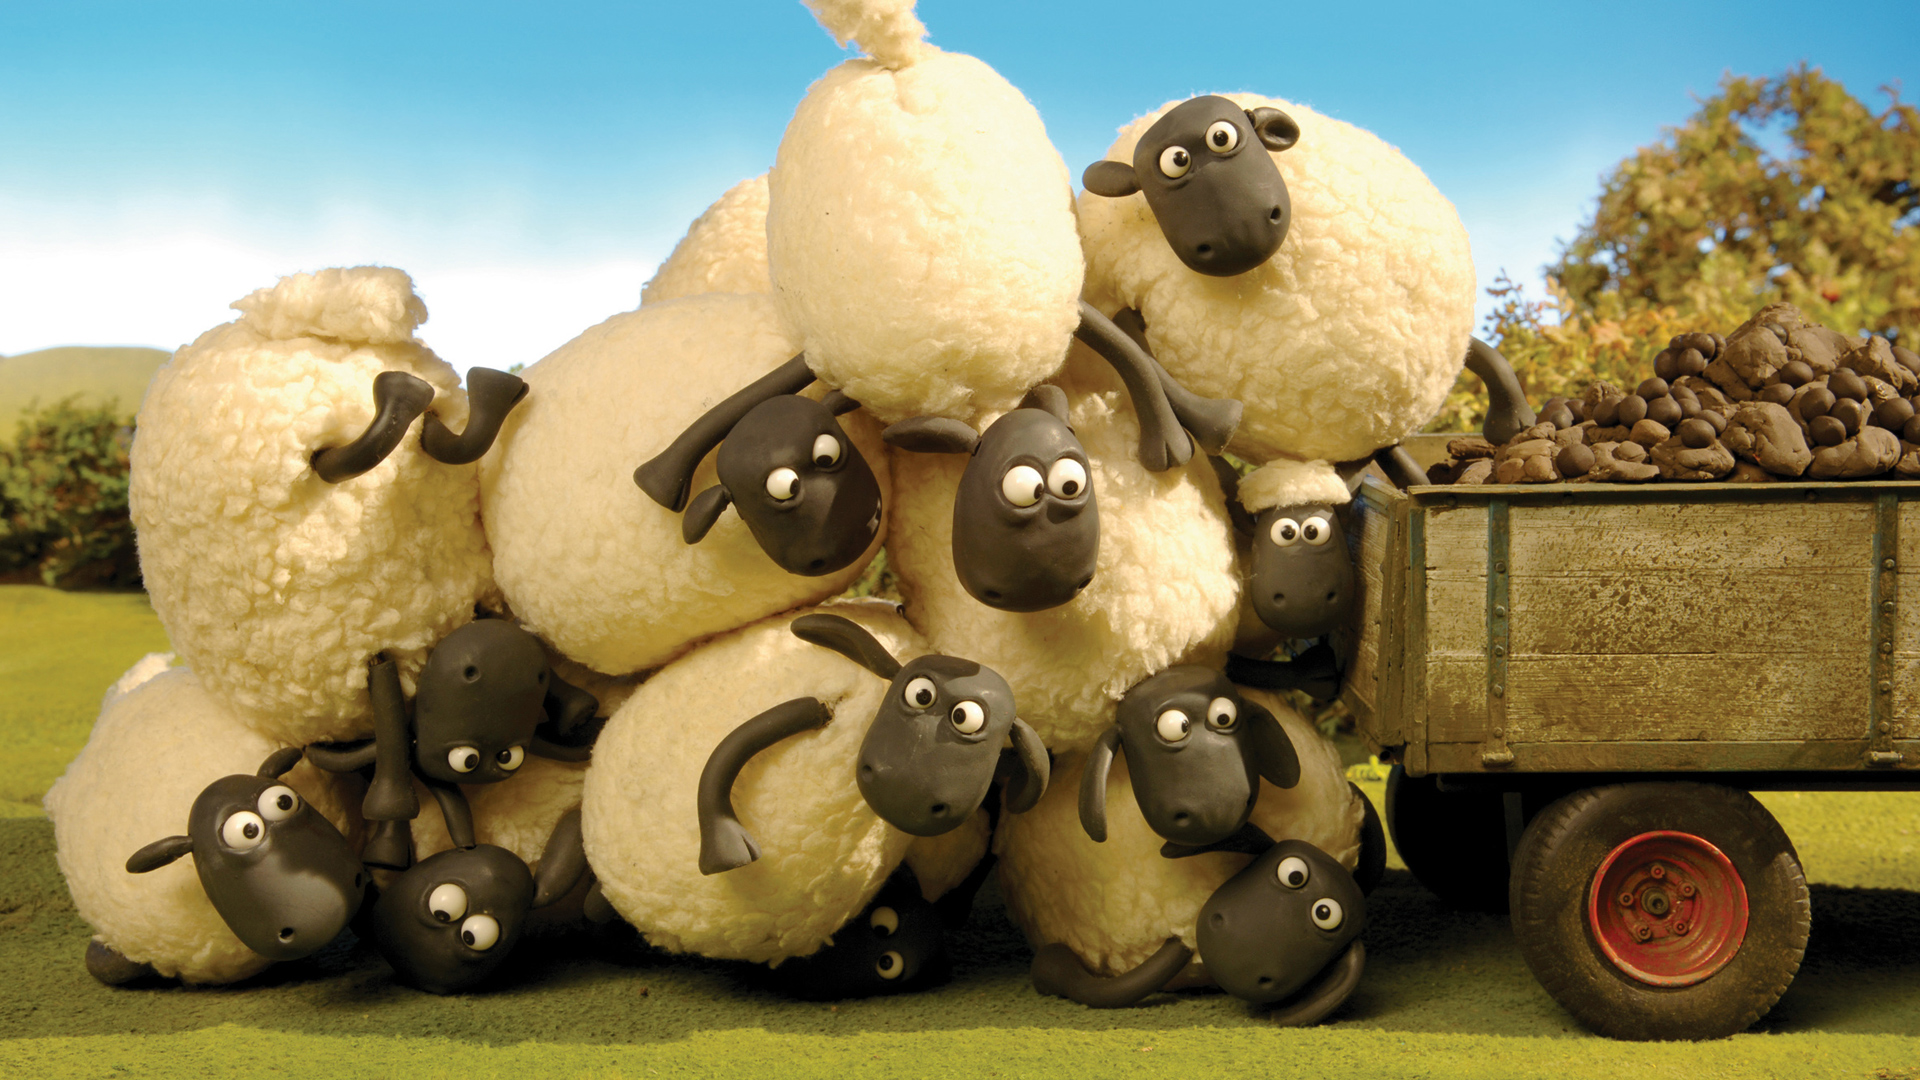 Free Download Shaun The Sheep Wallpaper Hight Quality Idiot Dollar 19x1080 For Your Desktop Mobile Tablet Explore 76 Shaun The Sheep Wallpaper Sheep Wallpaper Desktop Hd Sheep Wallpaper